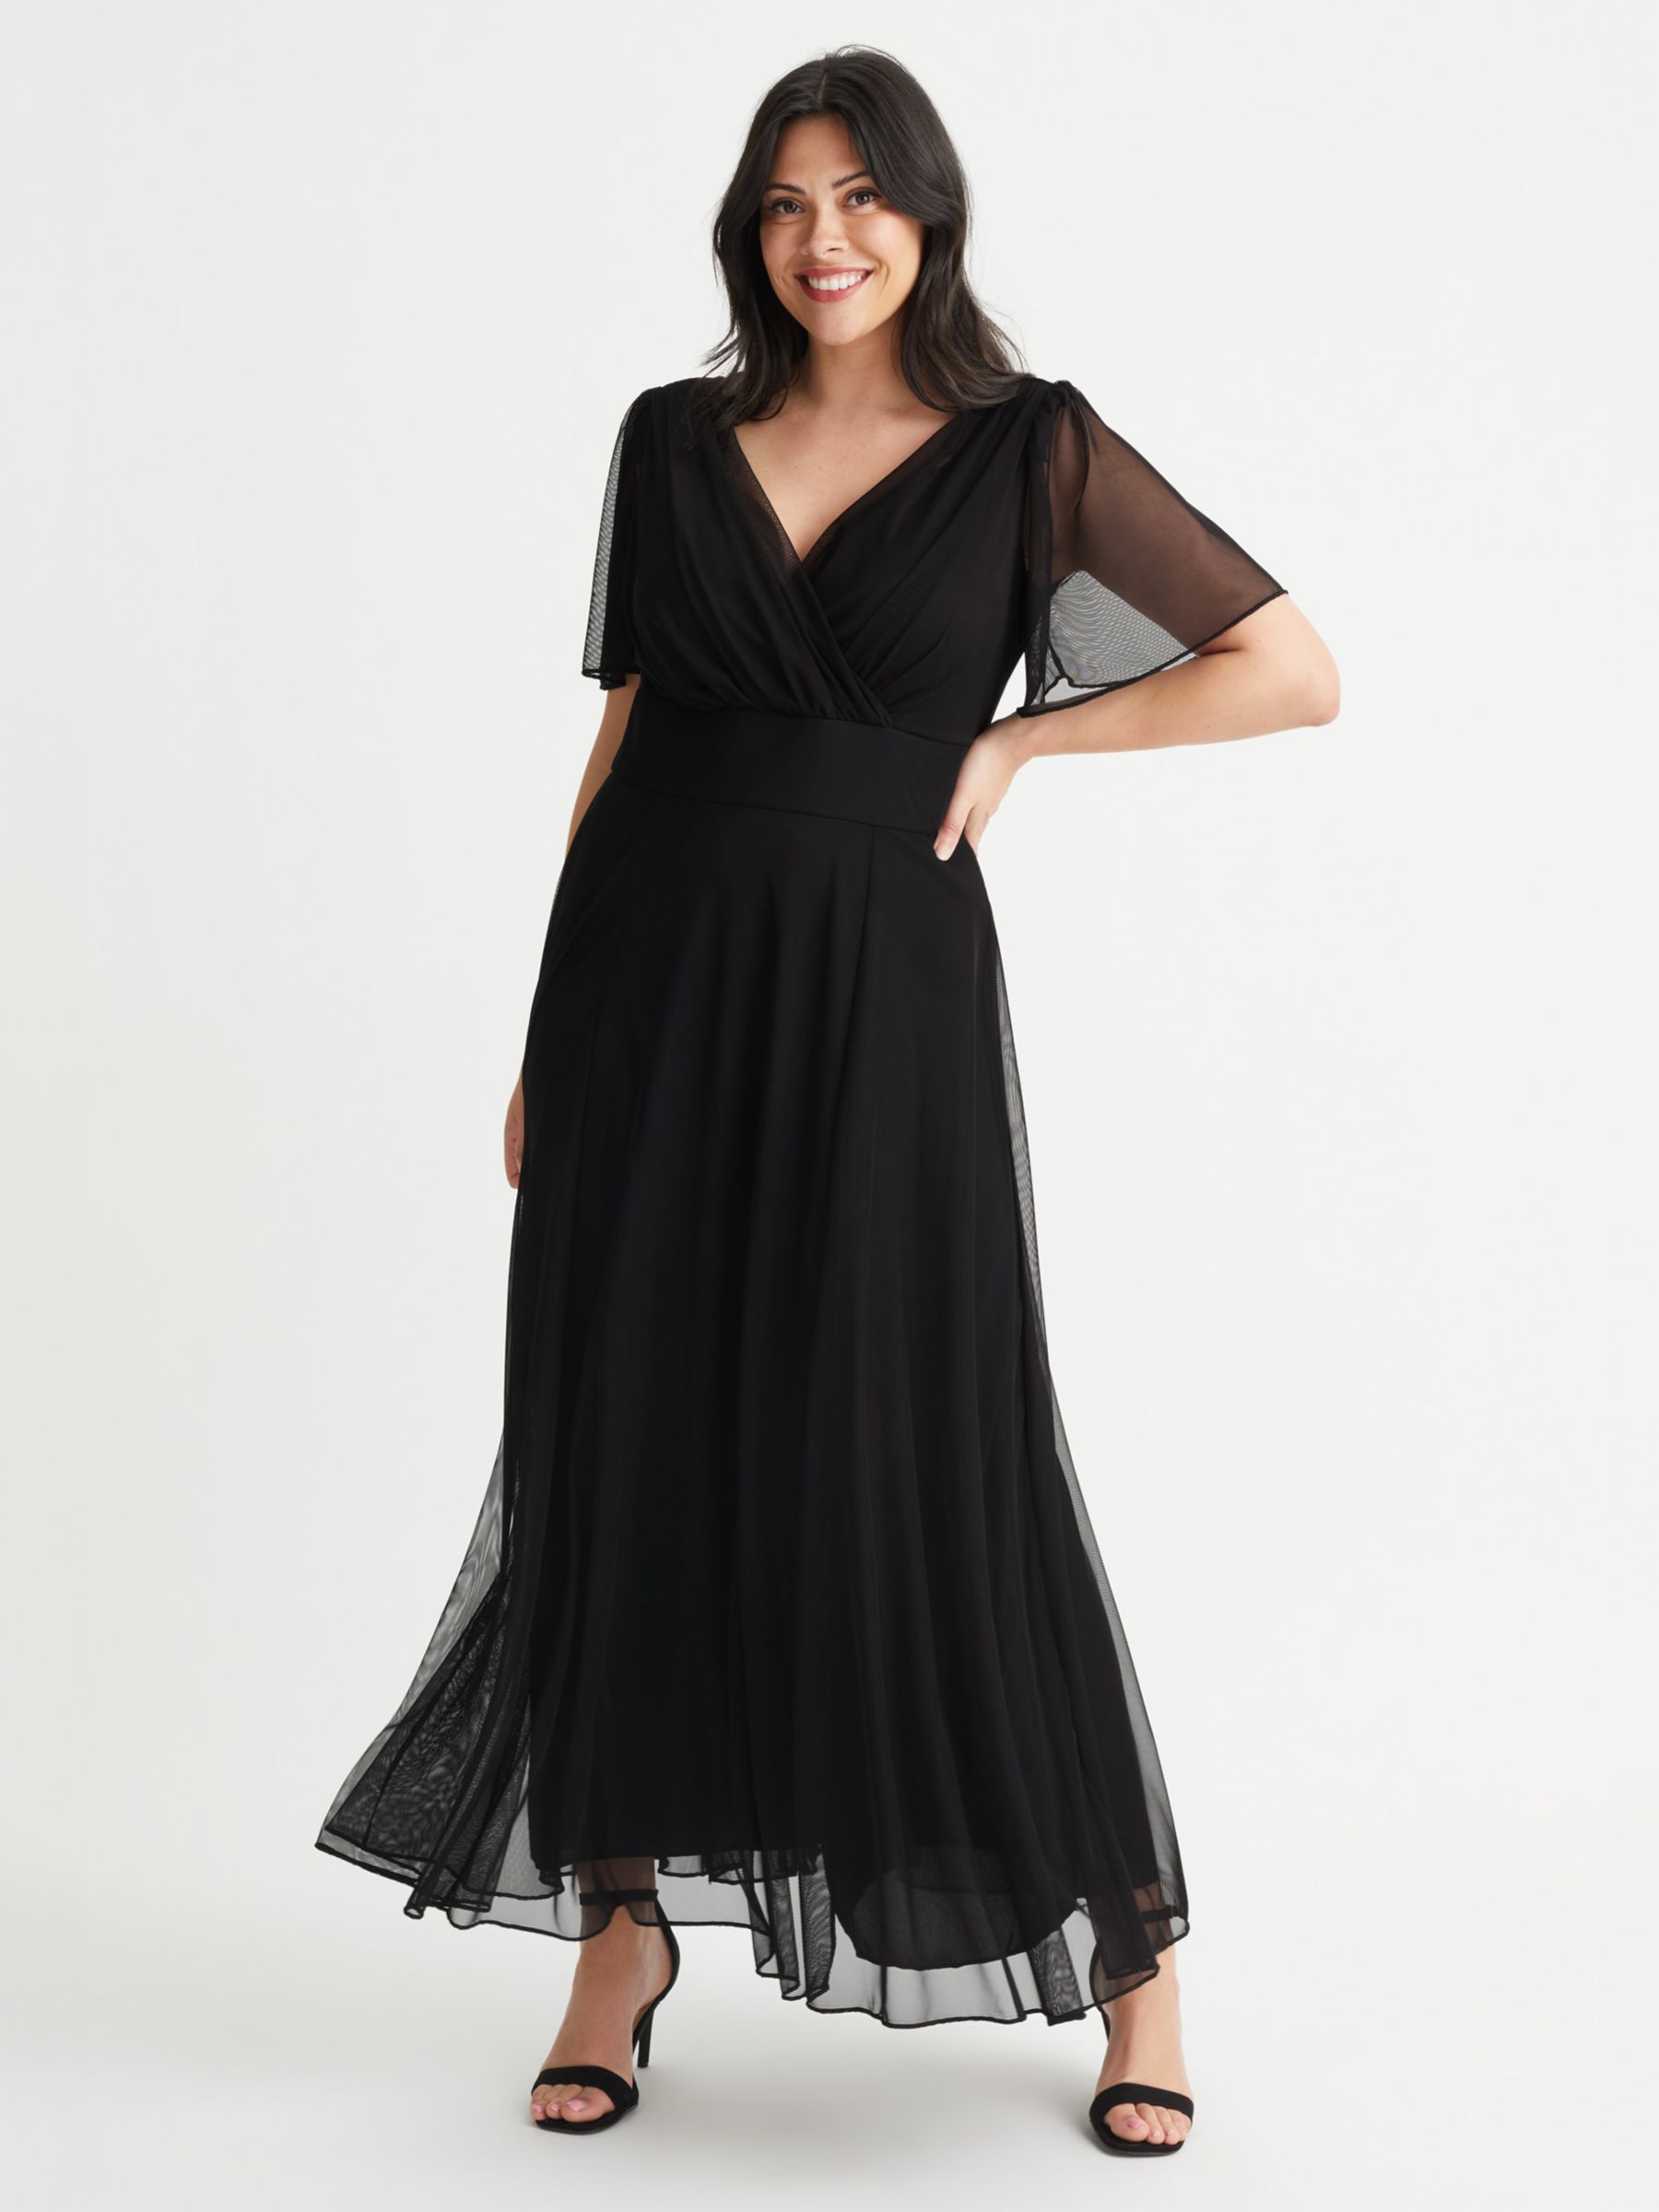 Plus Size Wedding Guest Outfits